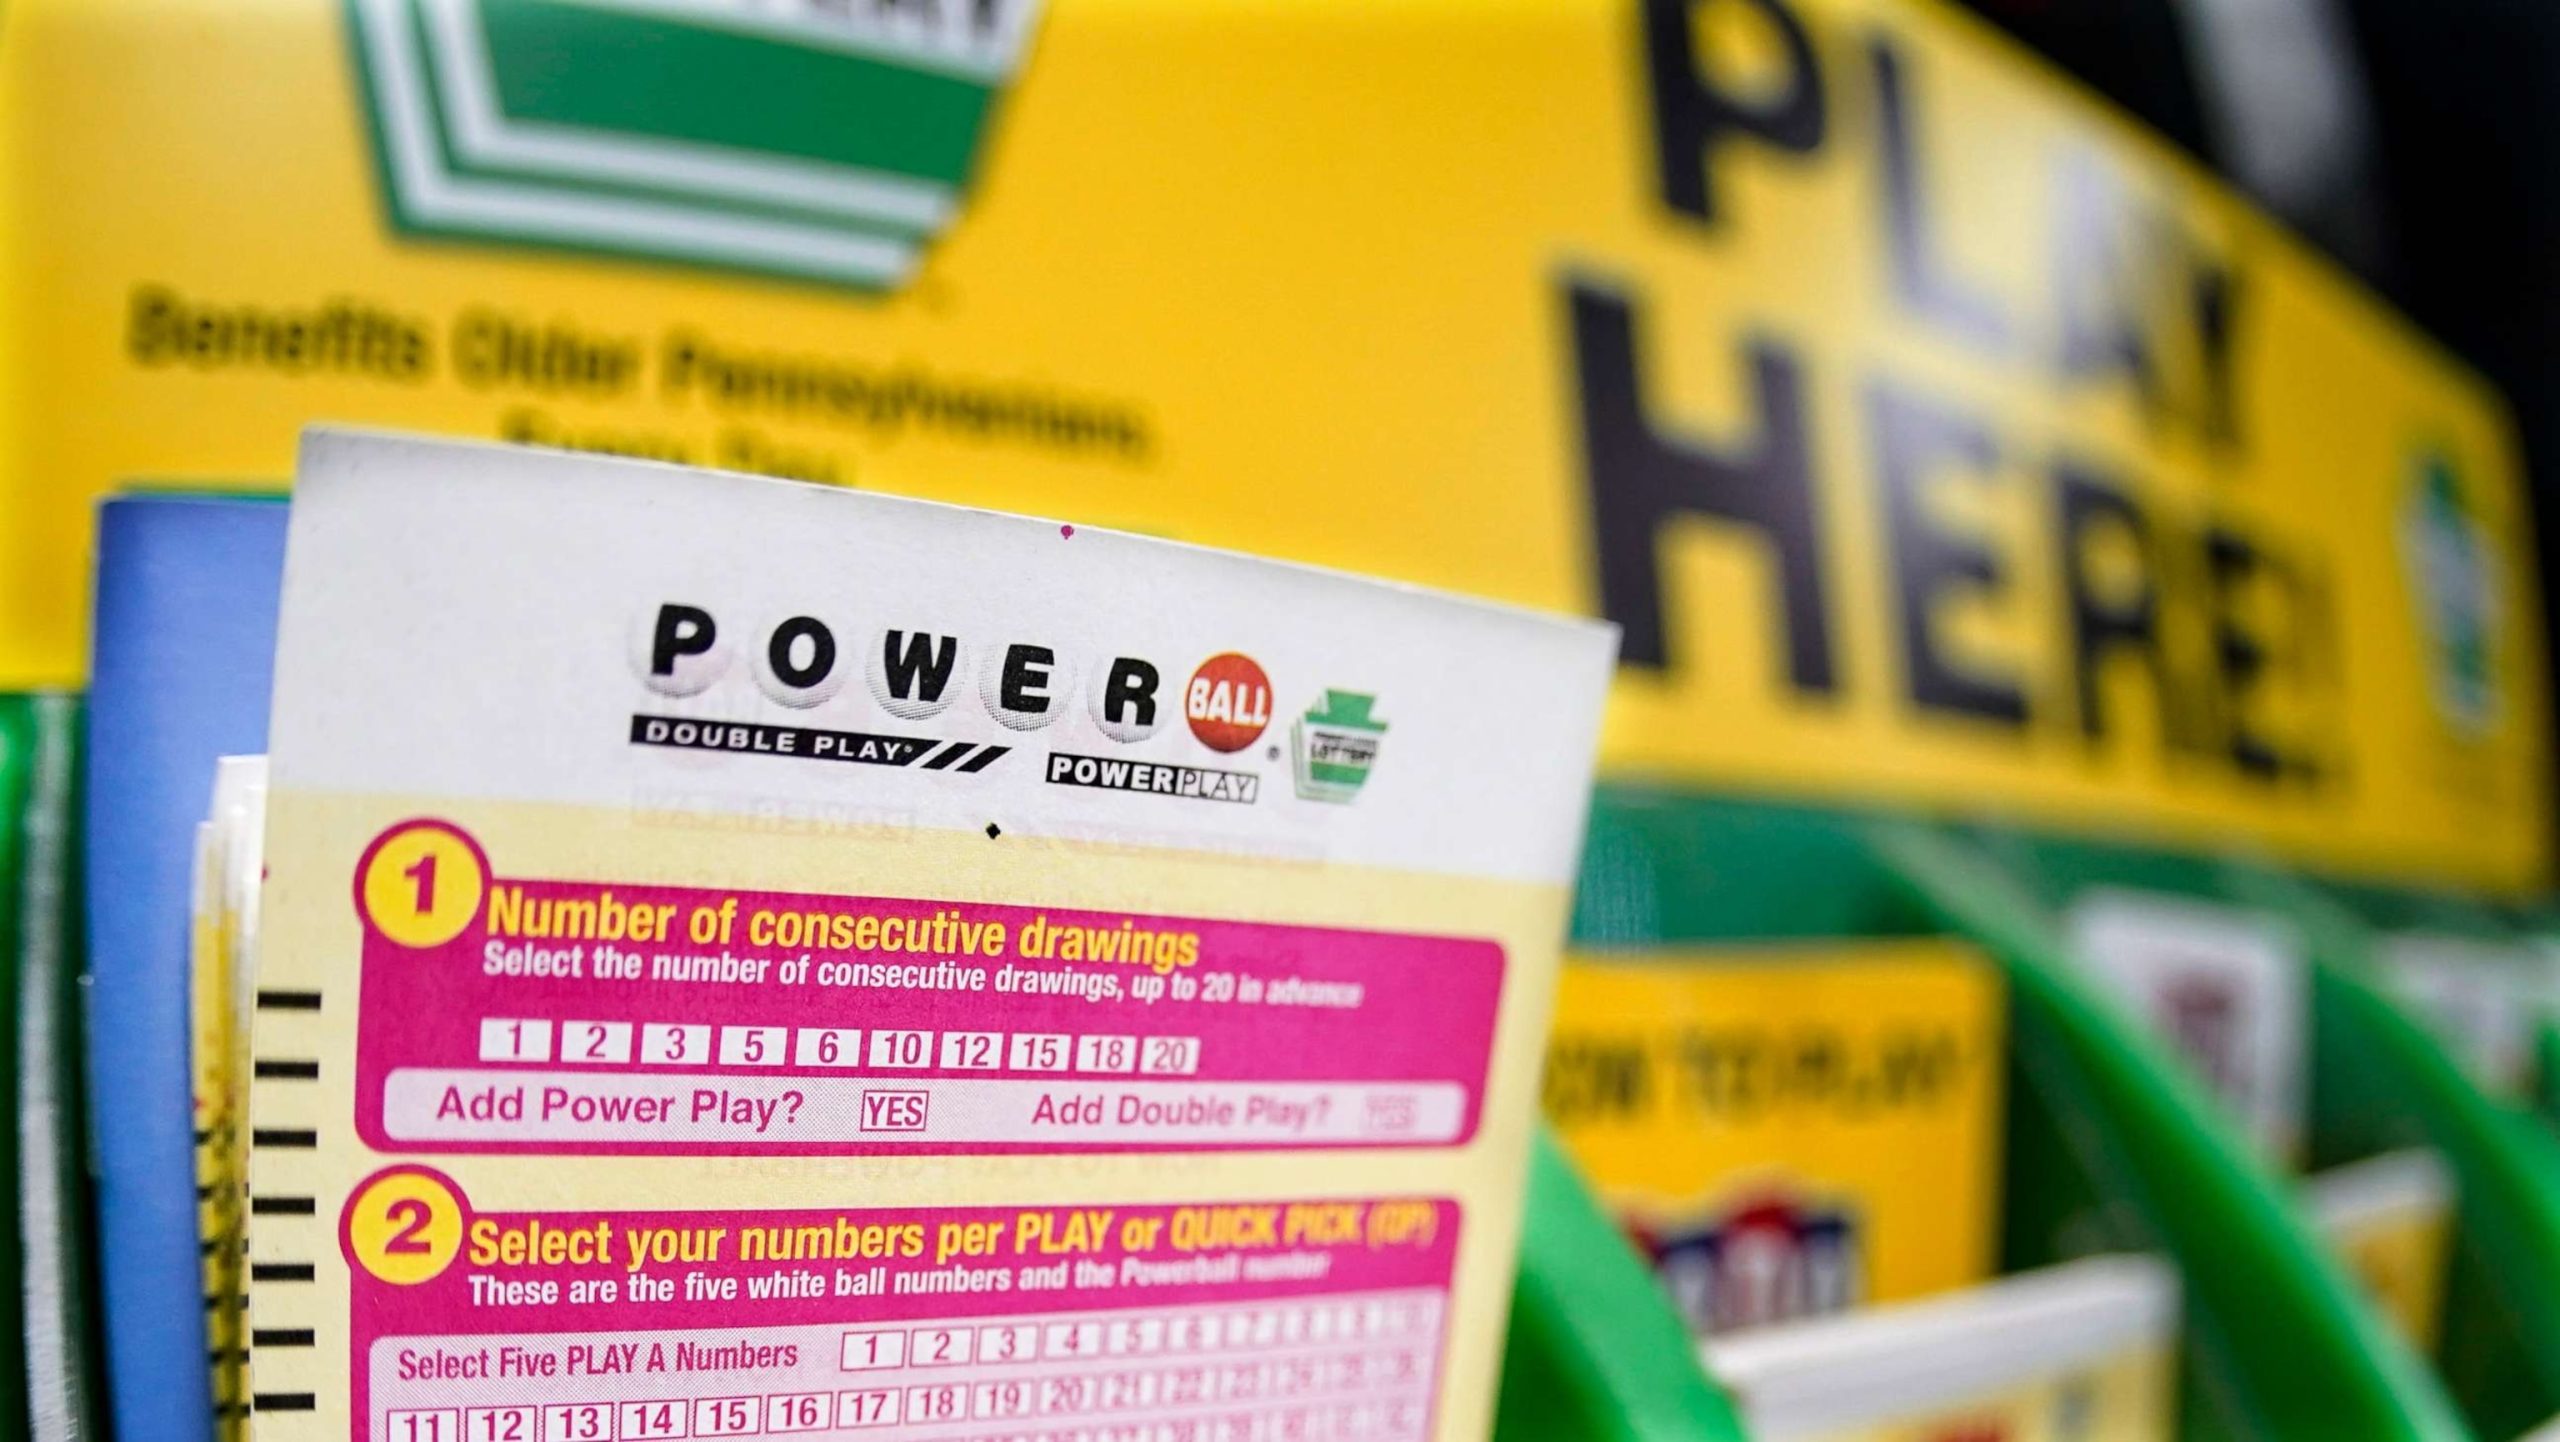 The Christmas Day Powerball jackpot has soared to an impressive $638 million.